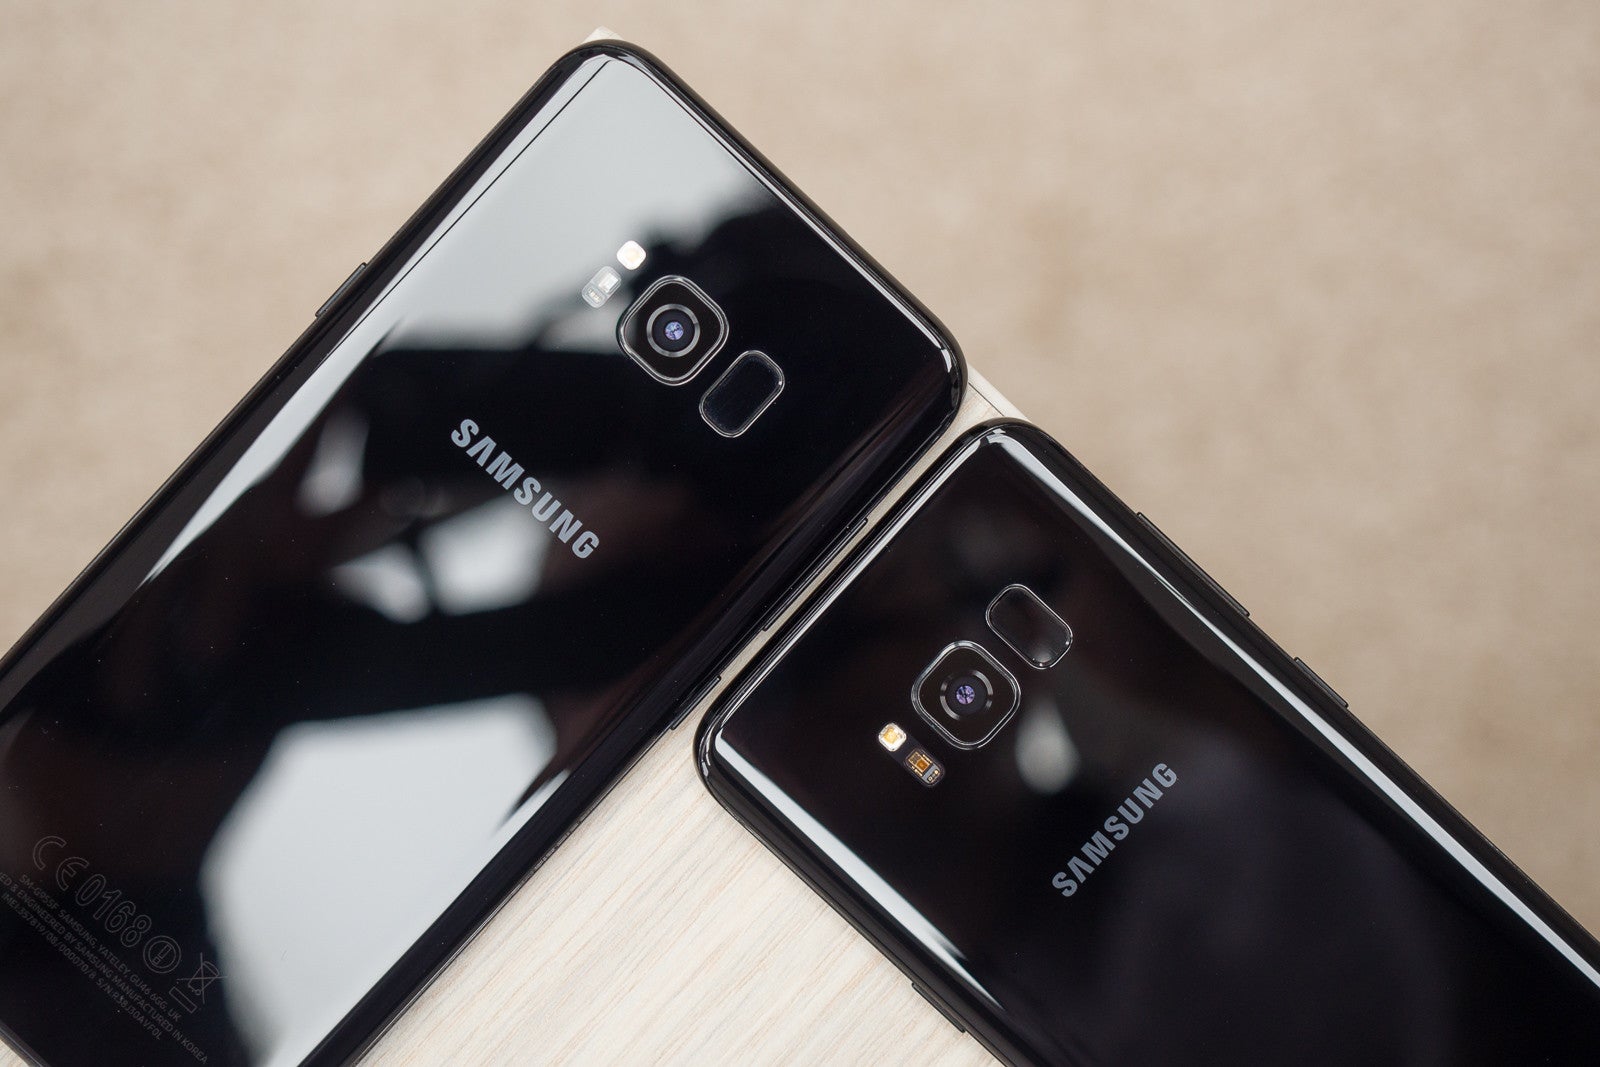 Deal: Samsung Galaxy S8 is on sale for as low as $360, here are all the deals